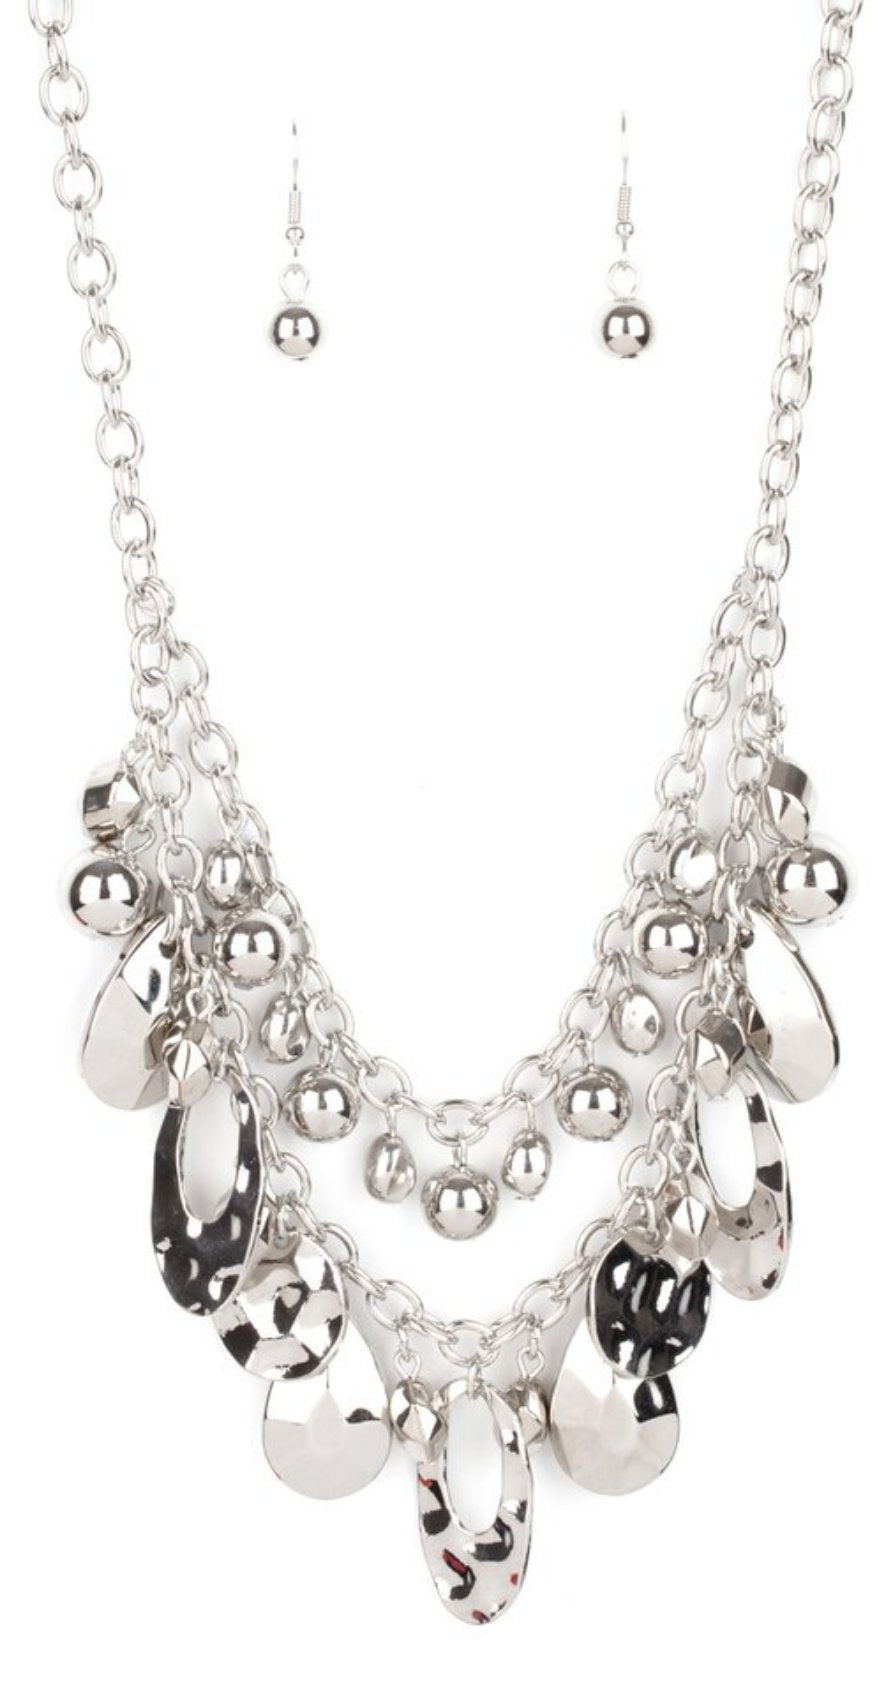 Extra Exhilarating Silver Necklace and Earrings